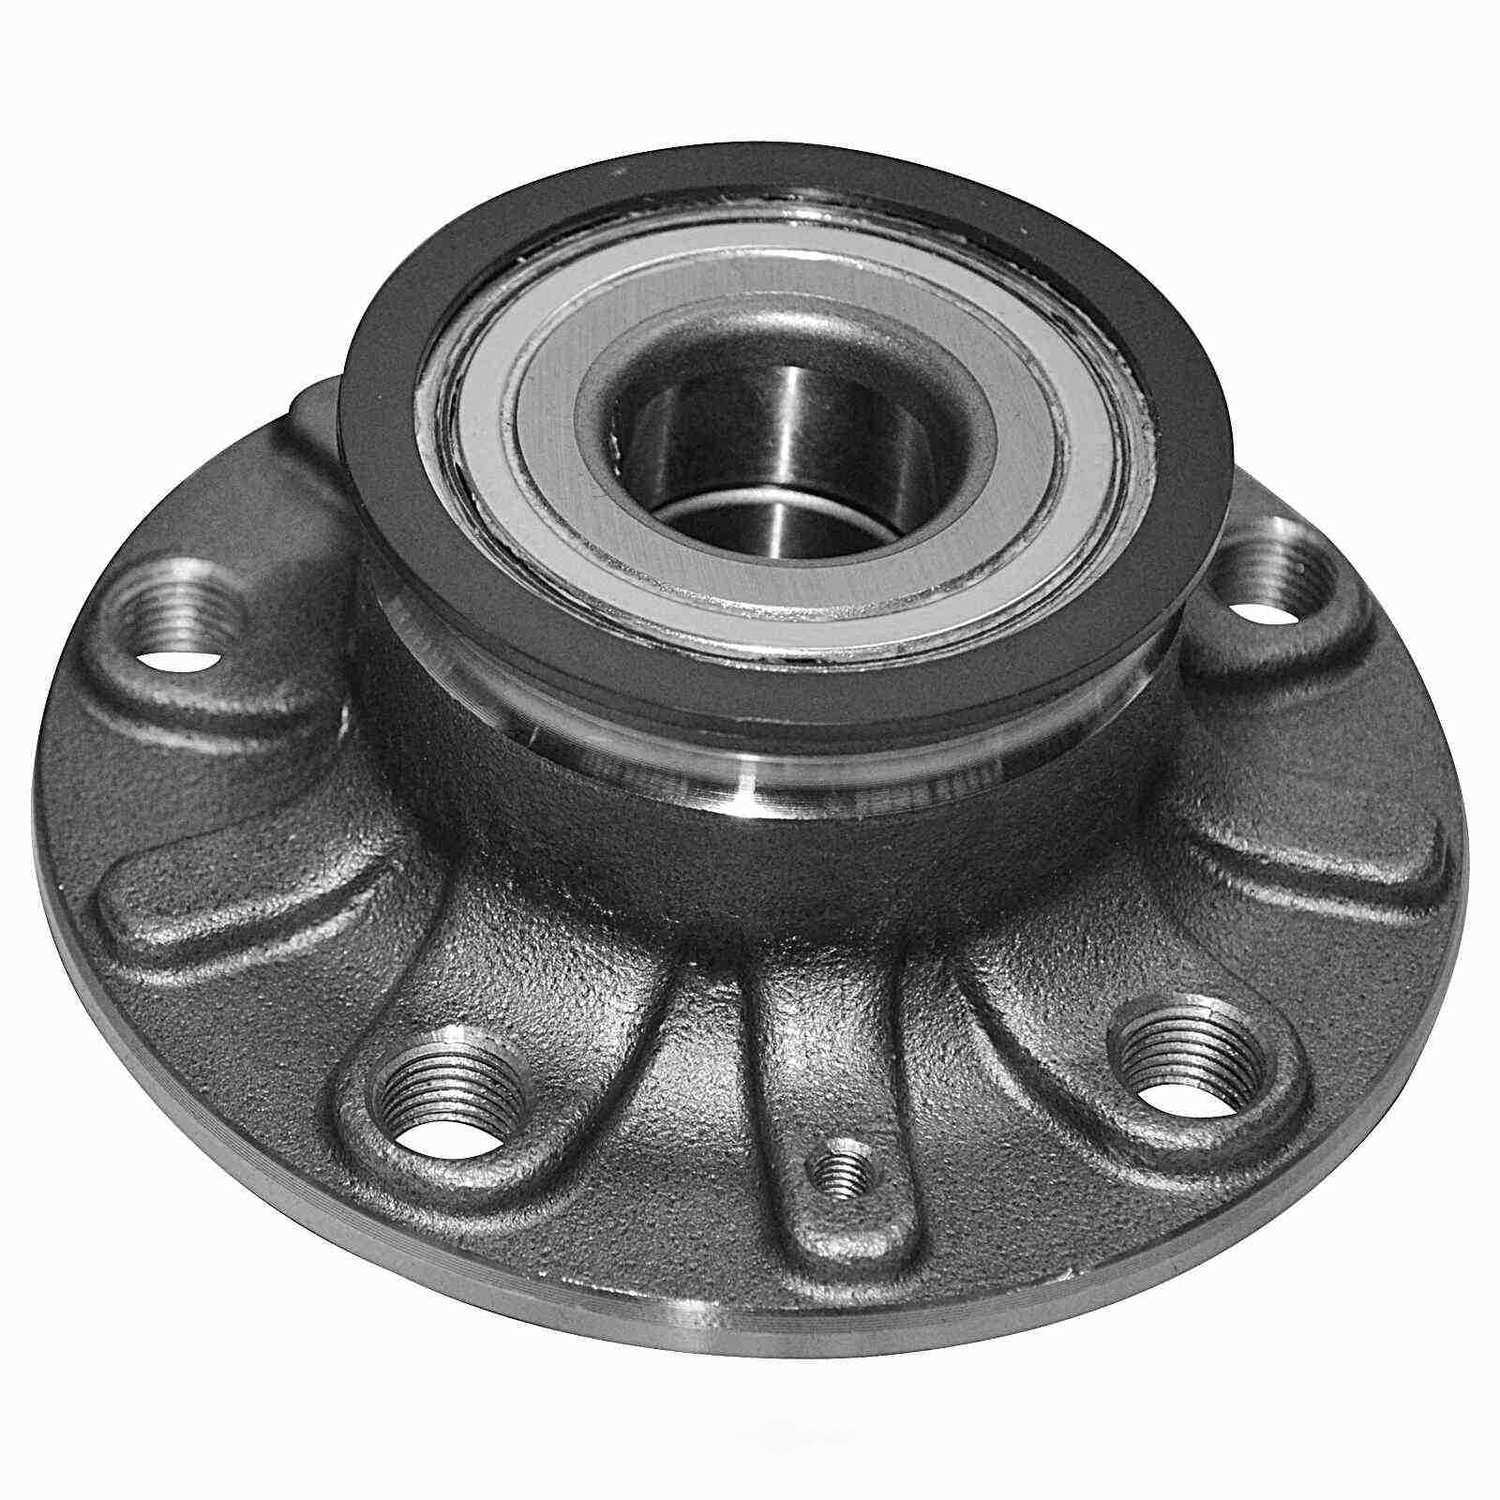 GSP NORTH AMERICA INC. - GSP New Wheel Bearing and Hub Assembly (Rear) - AD8 233336